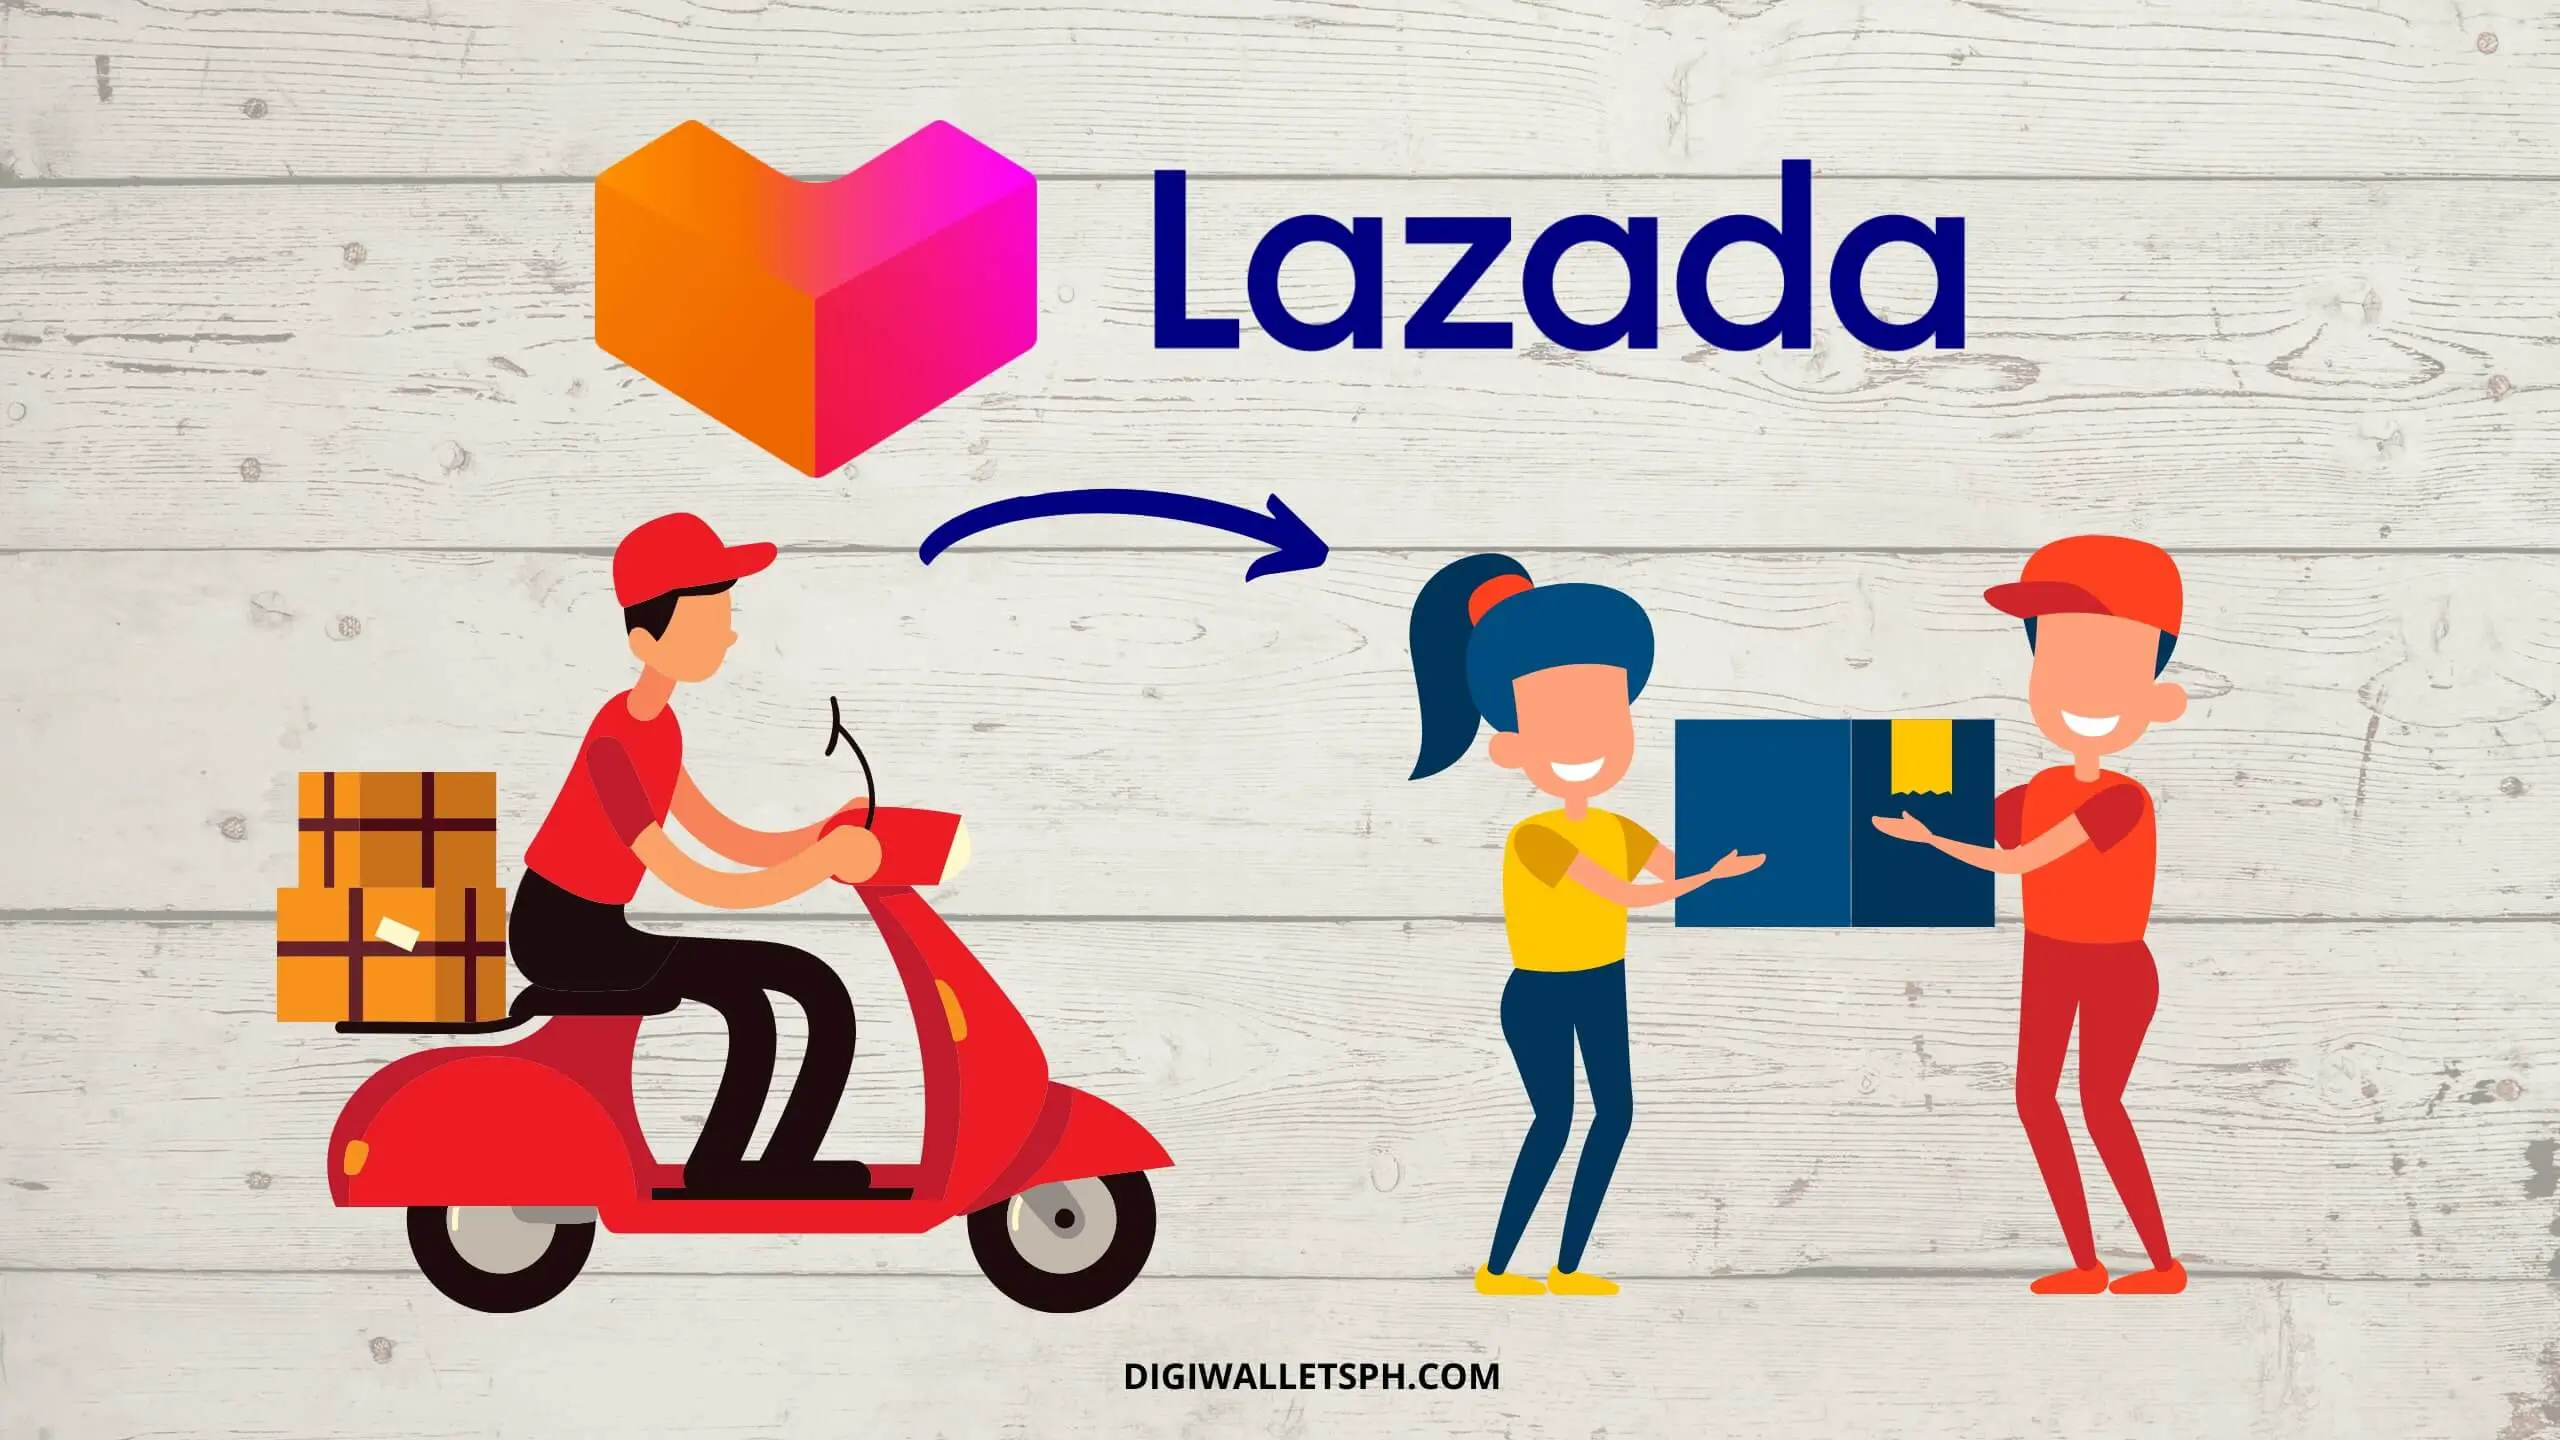 How to apply as a Lazada rider